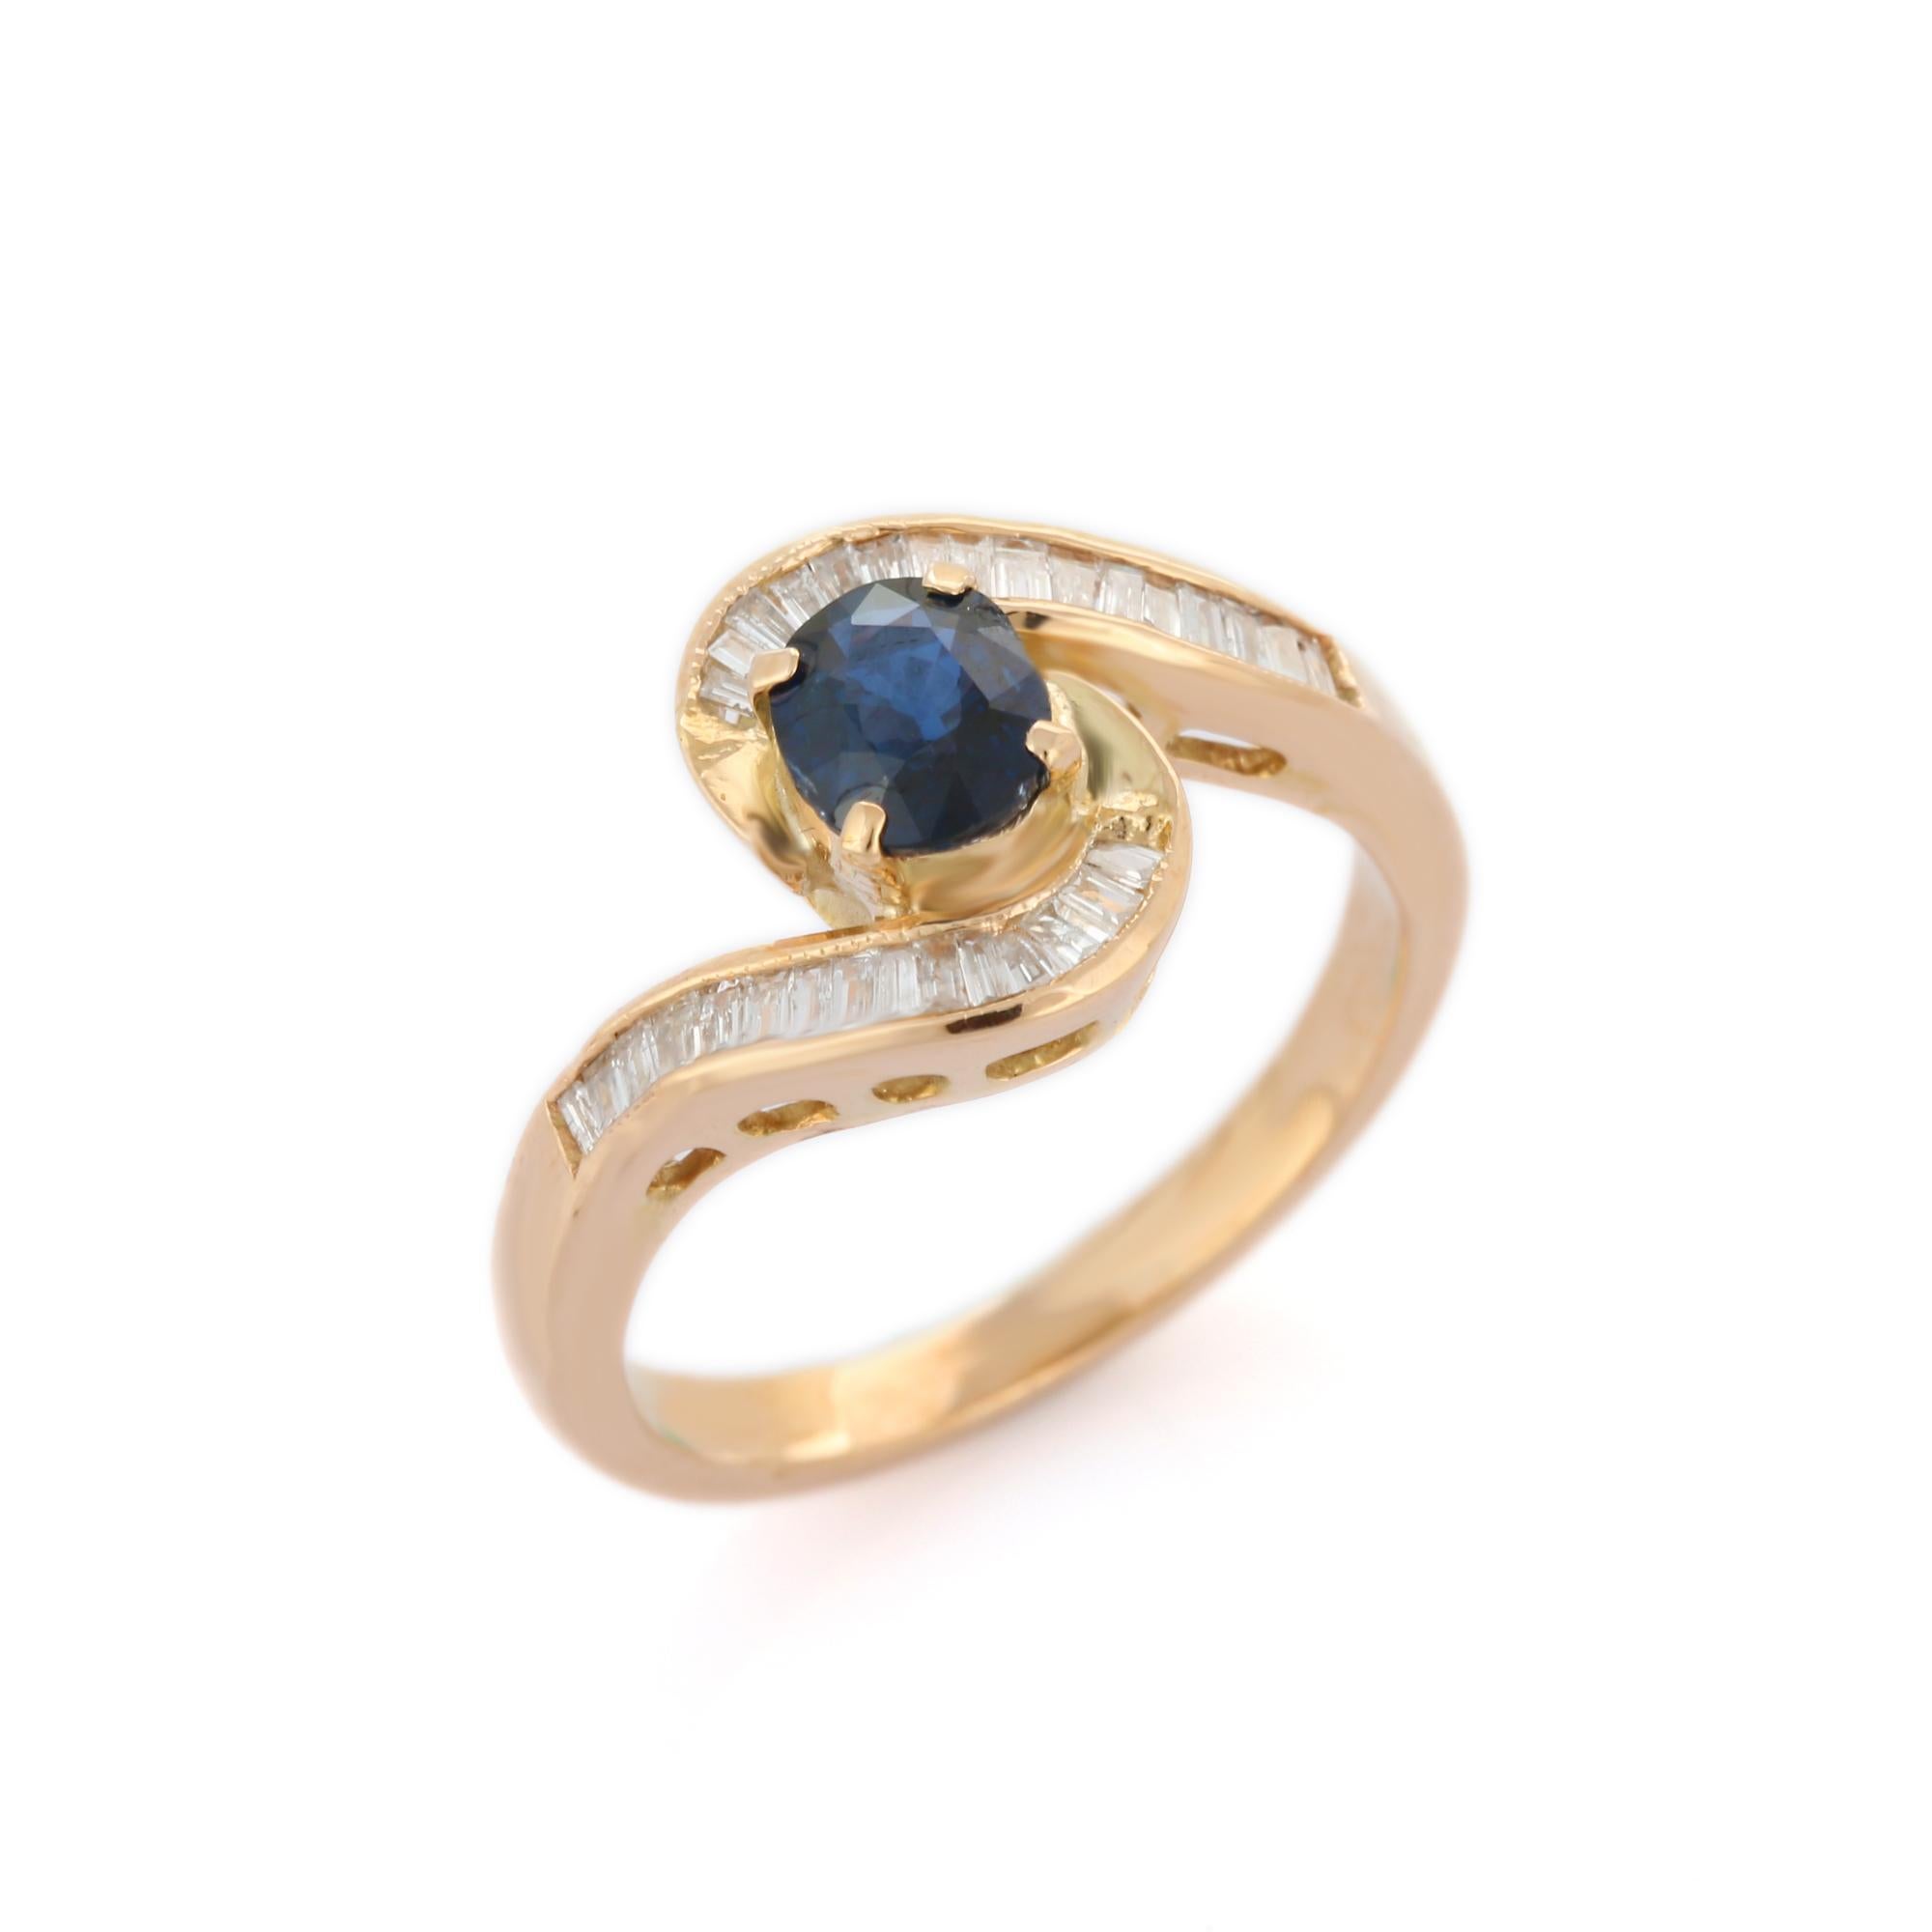 For Sale:  Diamond and Blue Sapphire Cross Shank Ring in 14k Solid Yellow Gold 5